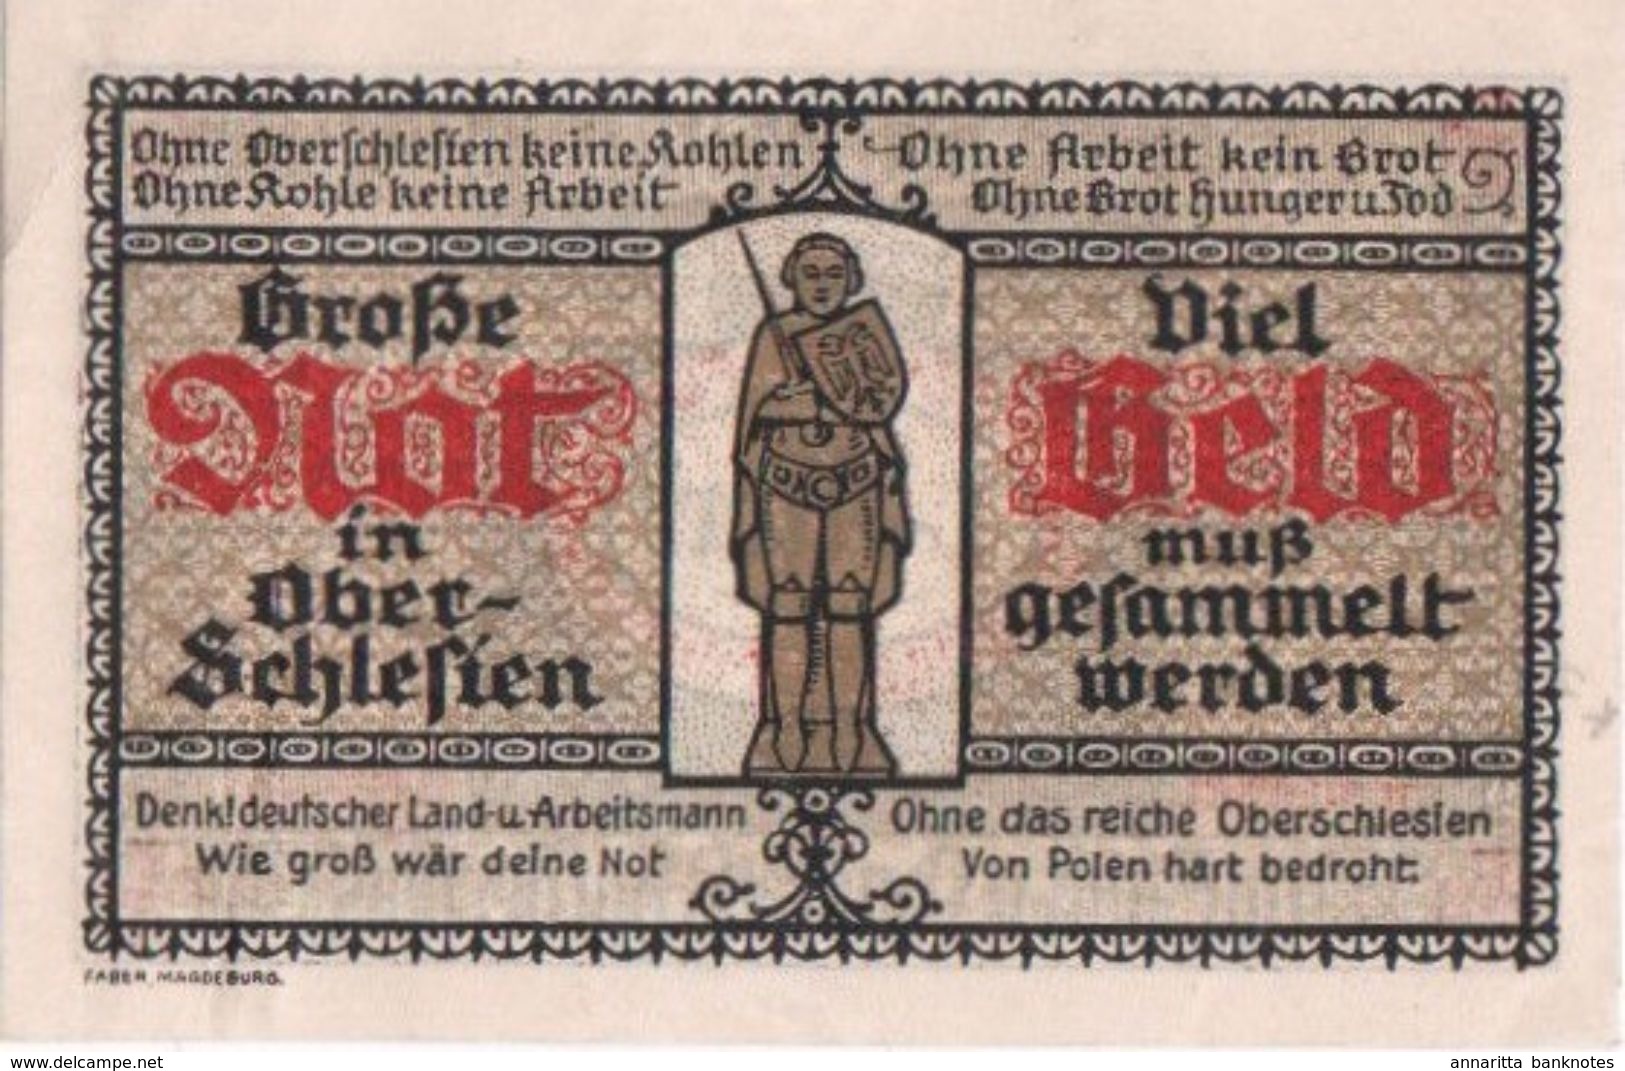 Germany (Halberstadt) 50 Pfennig  1921, Red Cross Upper Silesian Aid Day UNC - [11] Local Banknote Issues